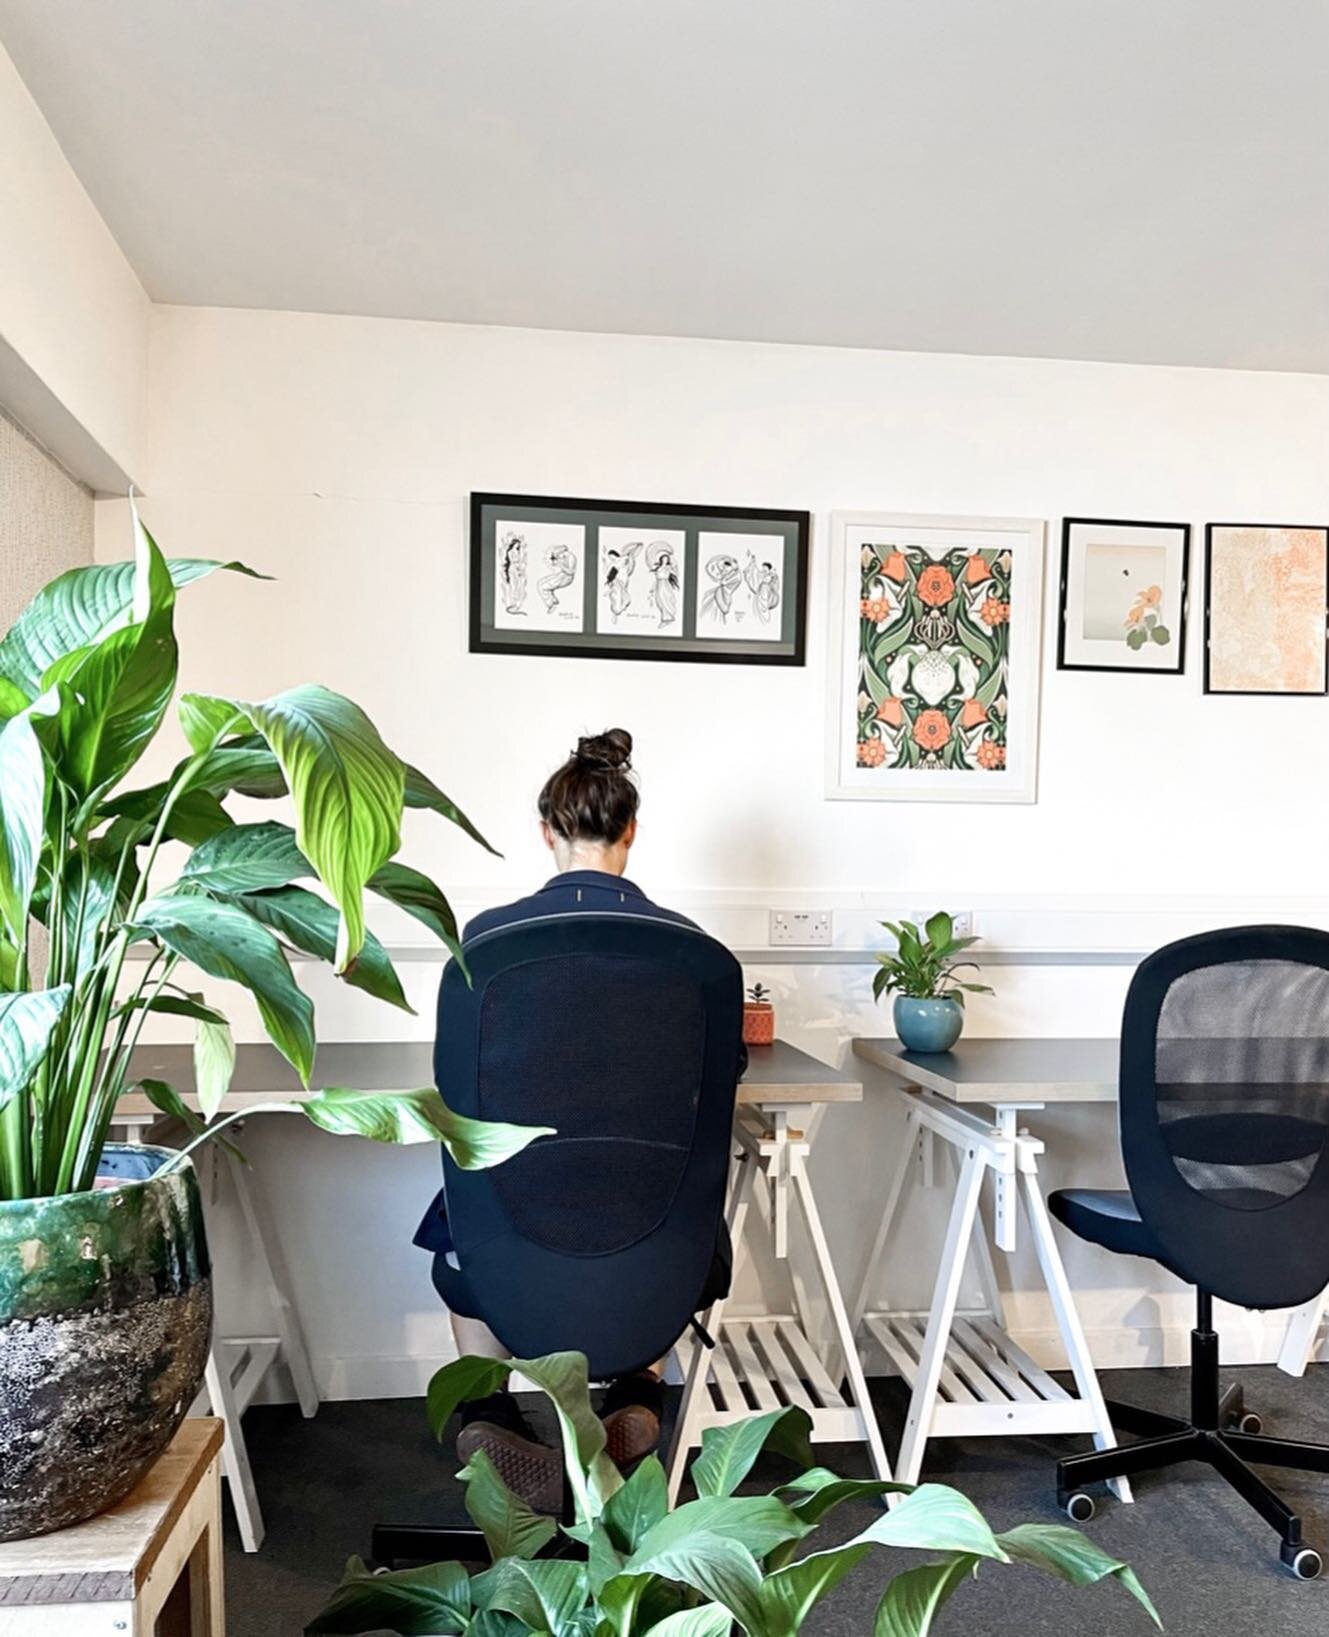 Sunny days in the office appreciating all of the lovely artwork here 🌞🌞

Artwork
- Triptych of Goddesses @death_lily
- Rose &amp; Lily by @philithblake

#coworkingspace #coworking #workspace #office #projectcowork #poole #smallbusiness #hotdesk #wa